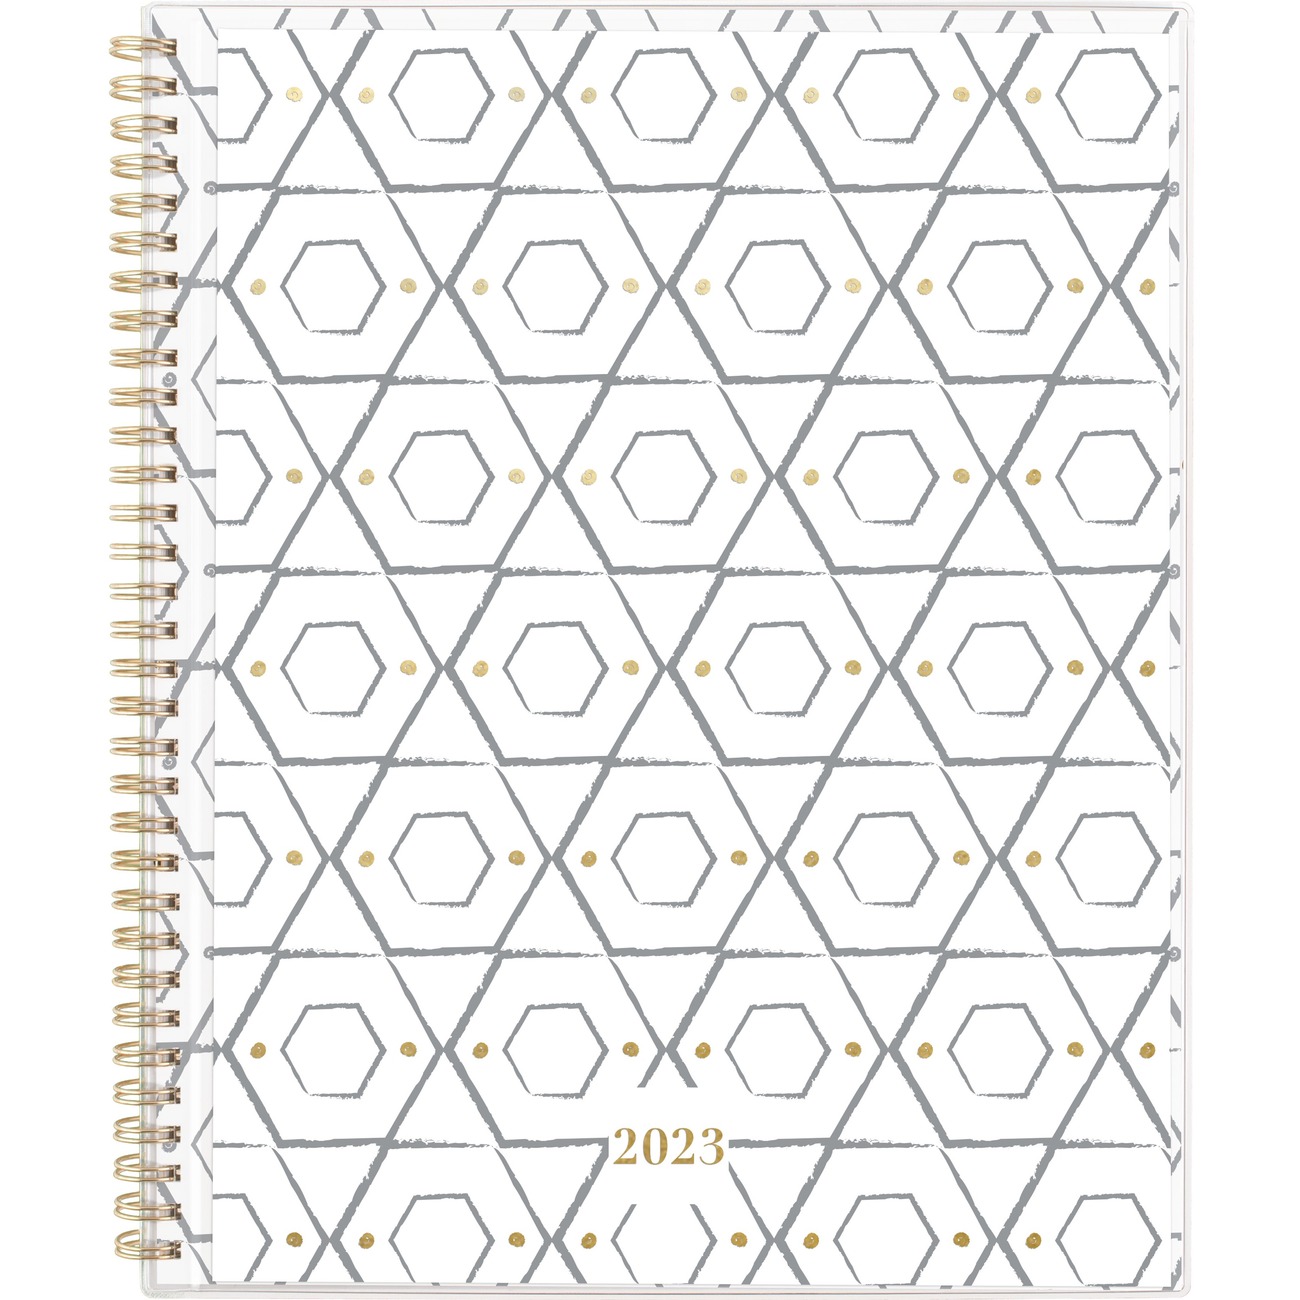 ocean-stationery-and-office-supplies-office-supplies-calendars